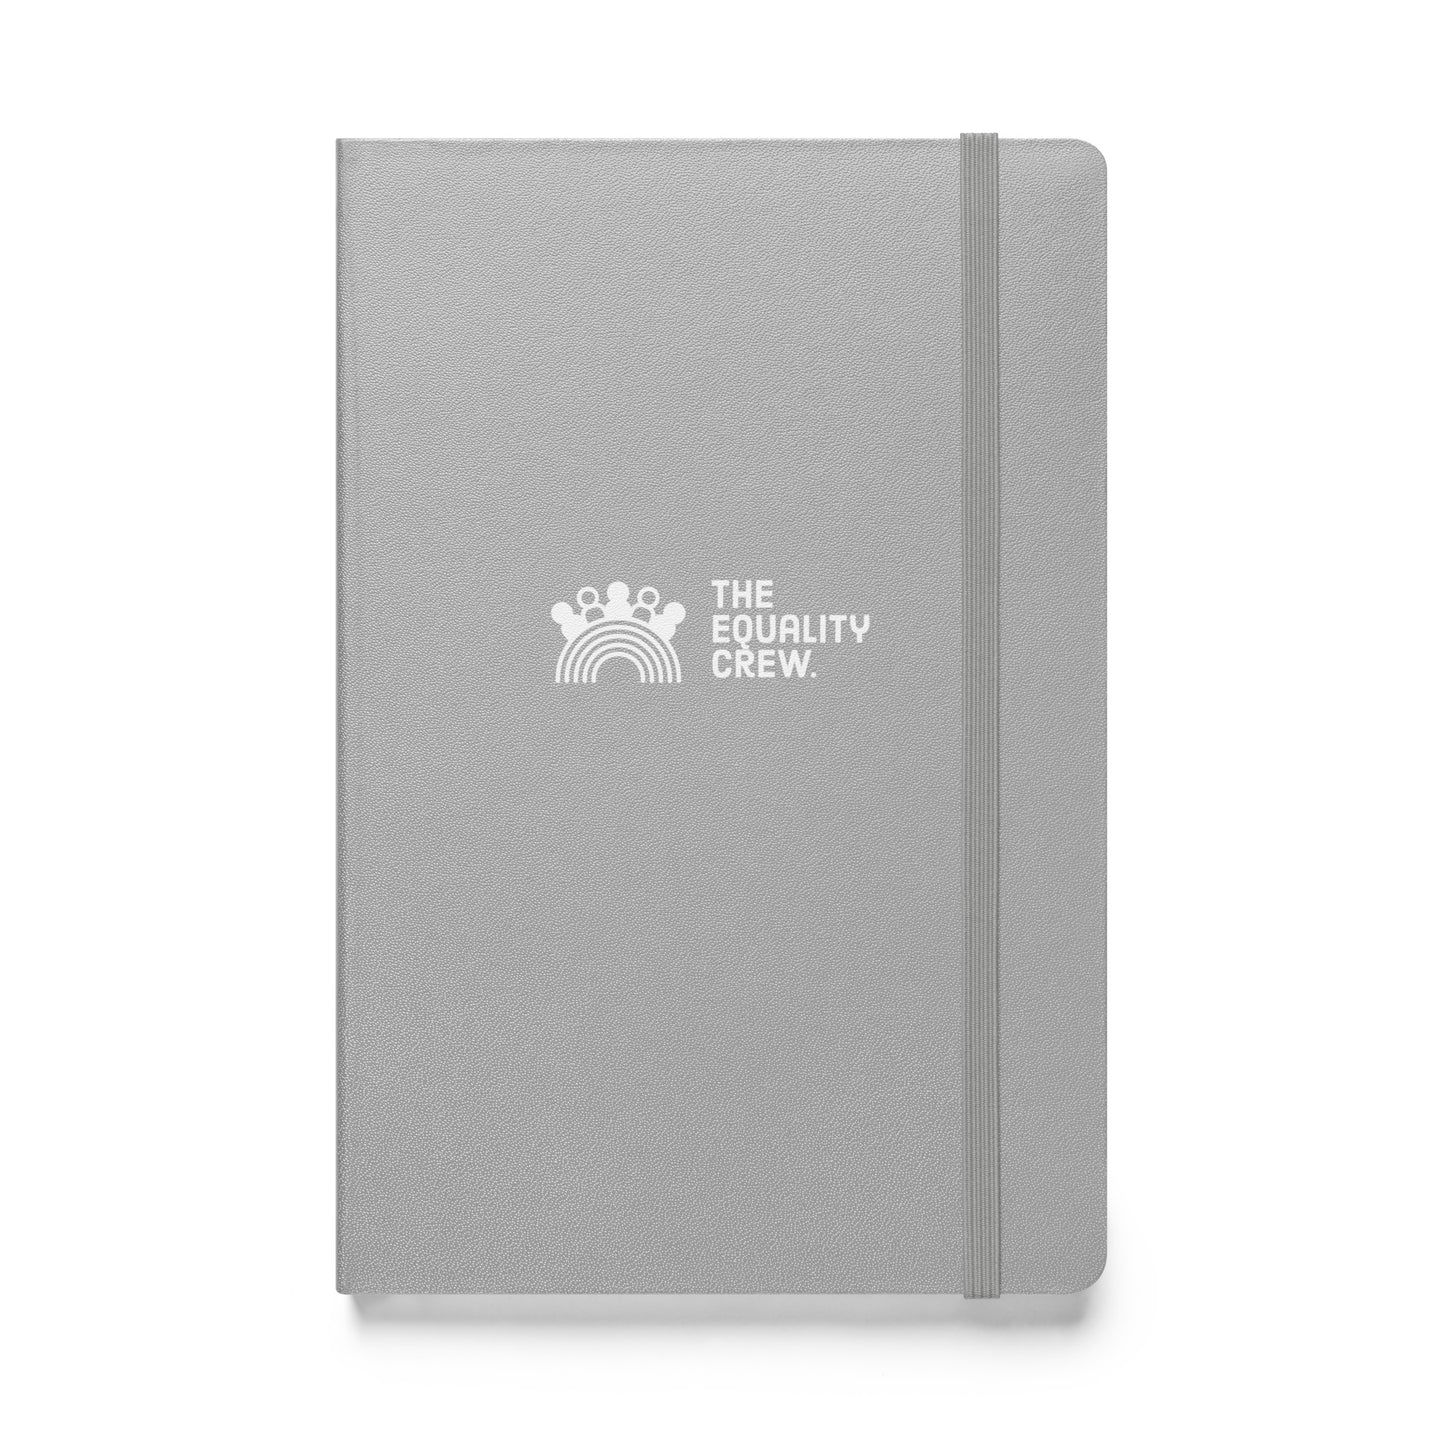 The Equality Crew Hardcover Notebook